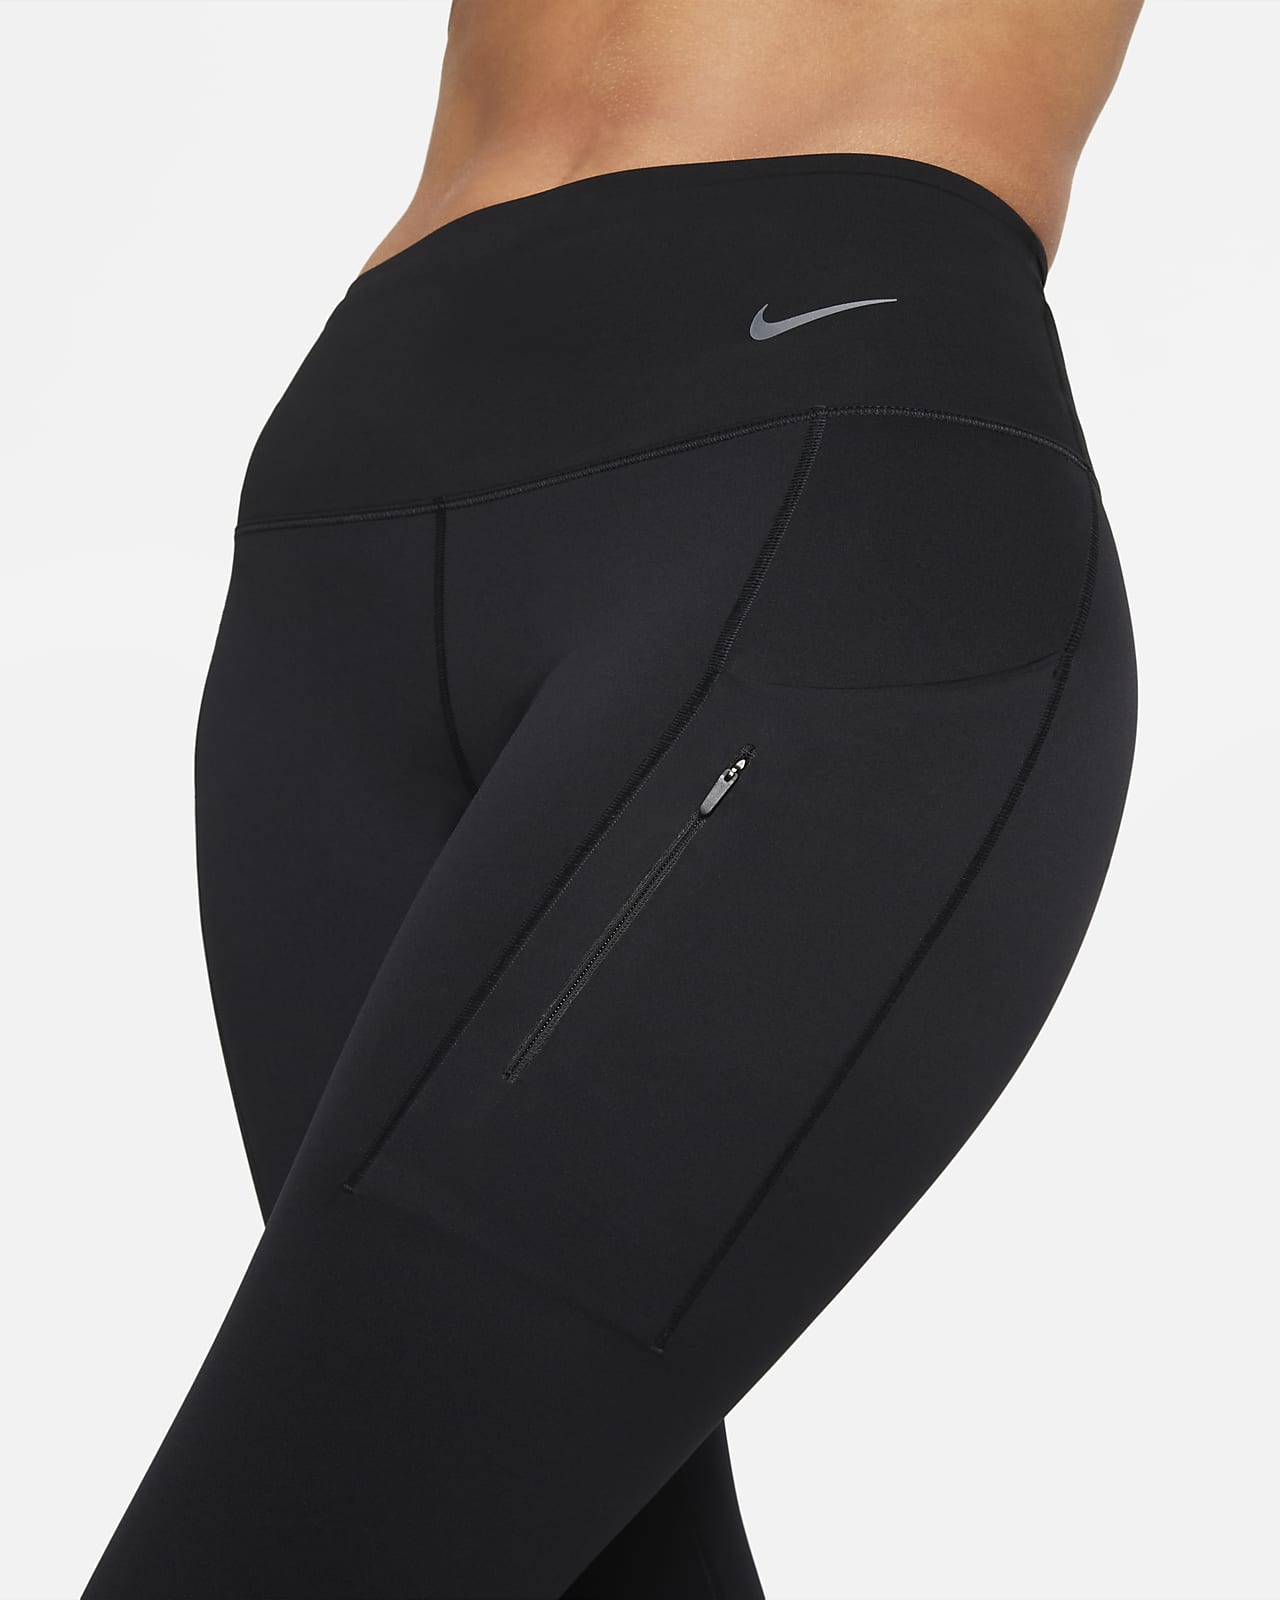 Nike cropped leggings dry fit small patterned